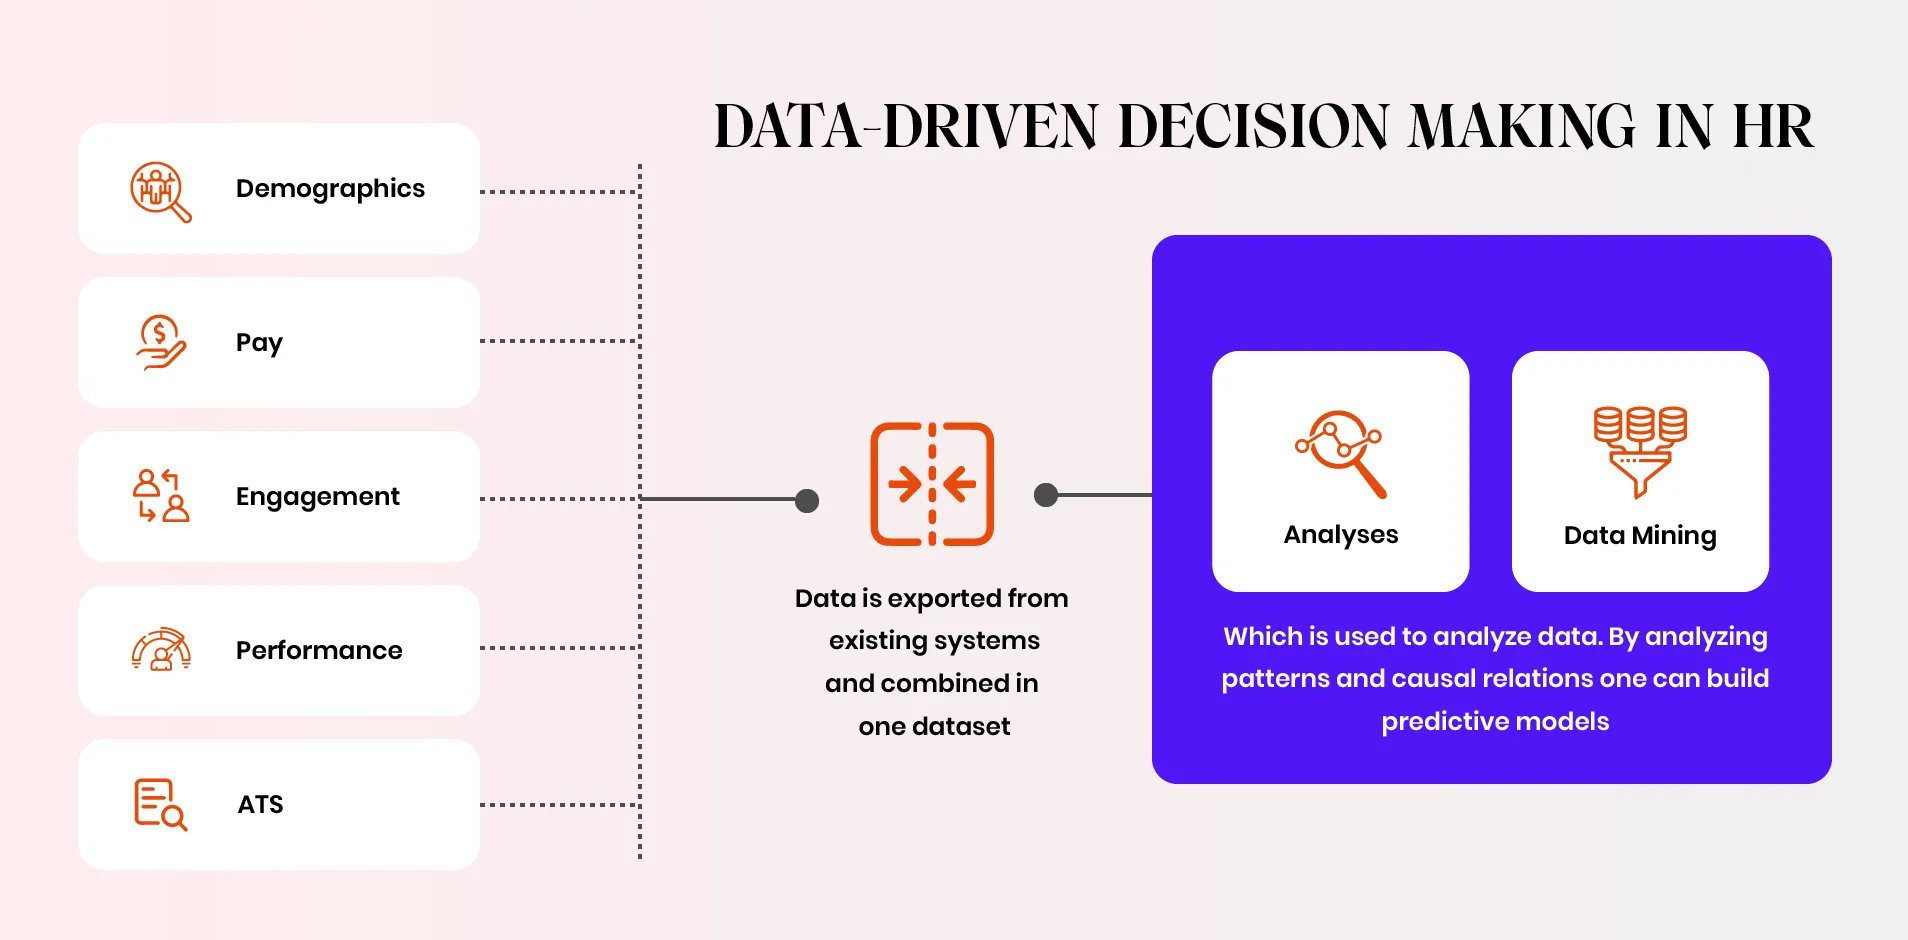 Data driven decision making in HR